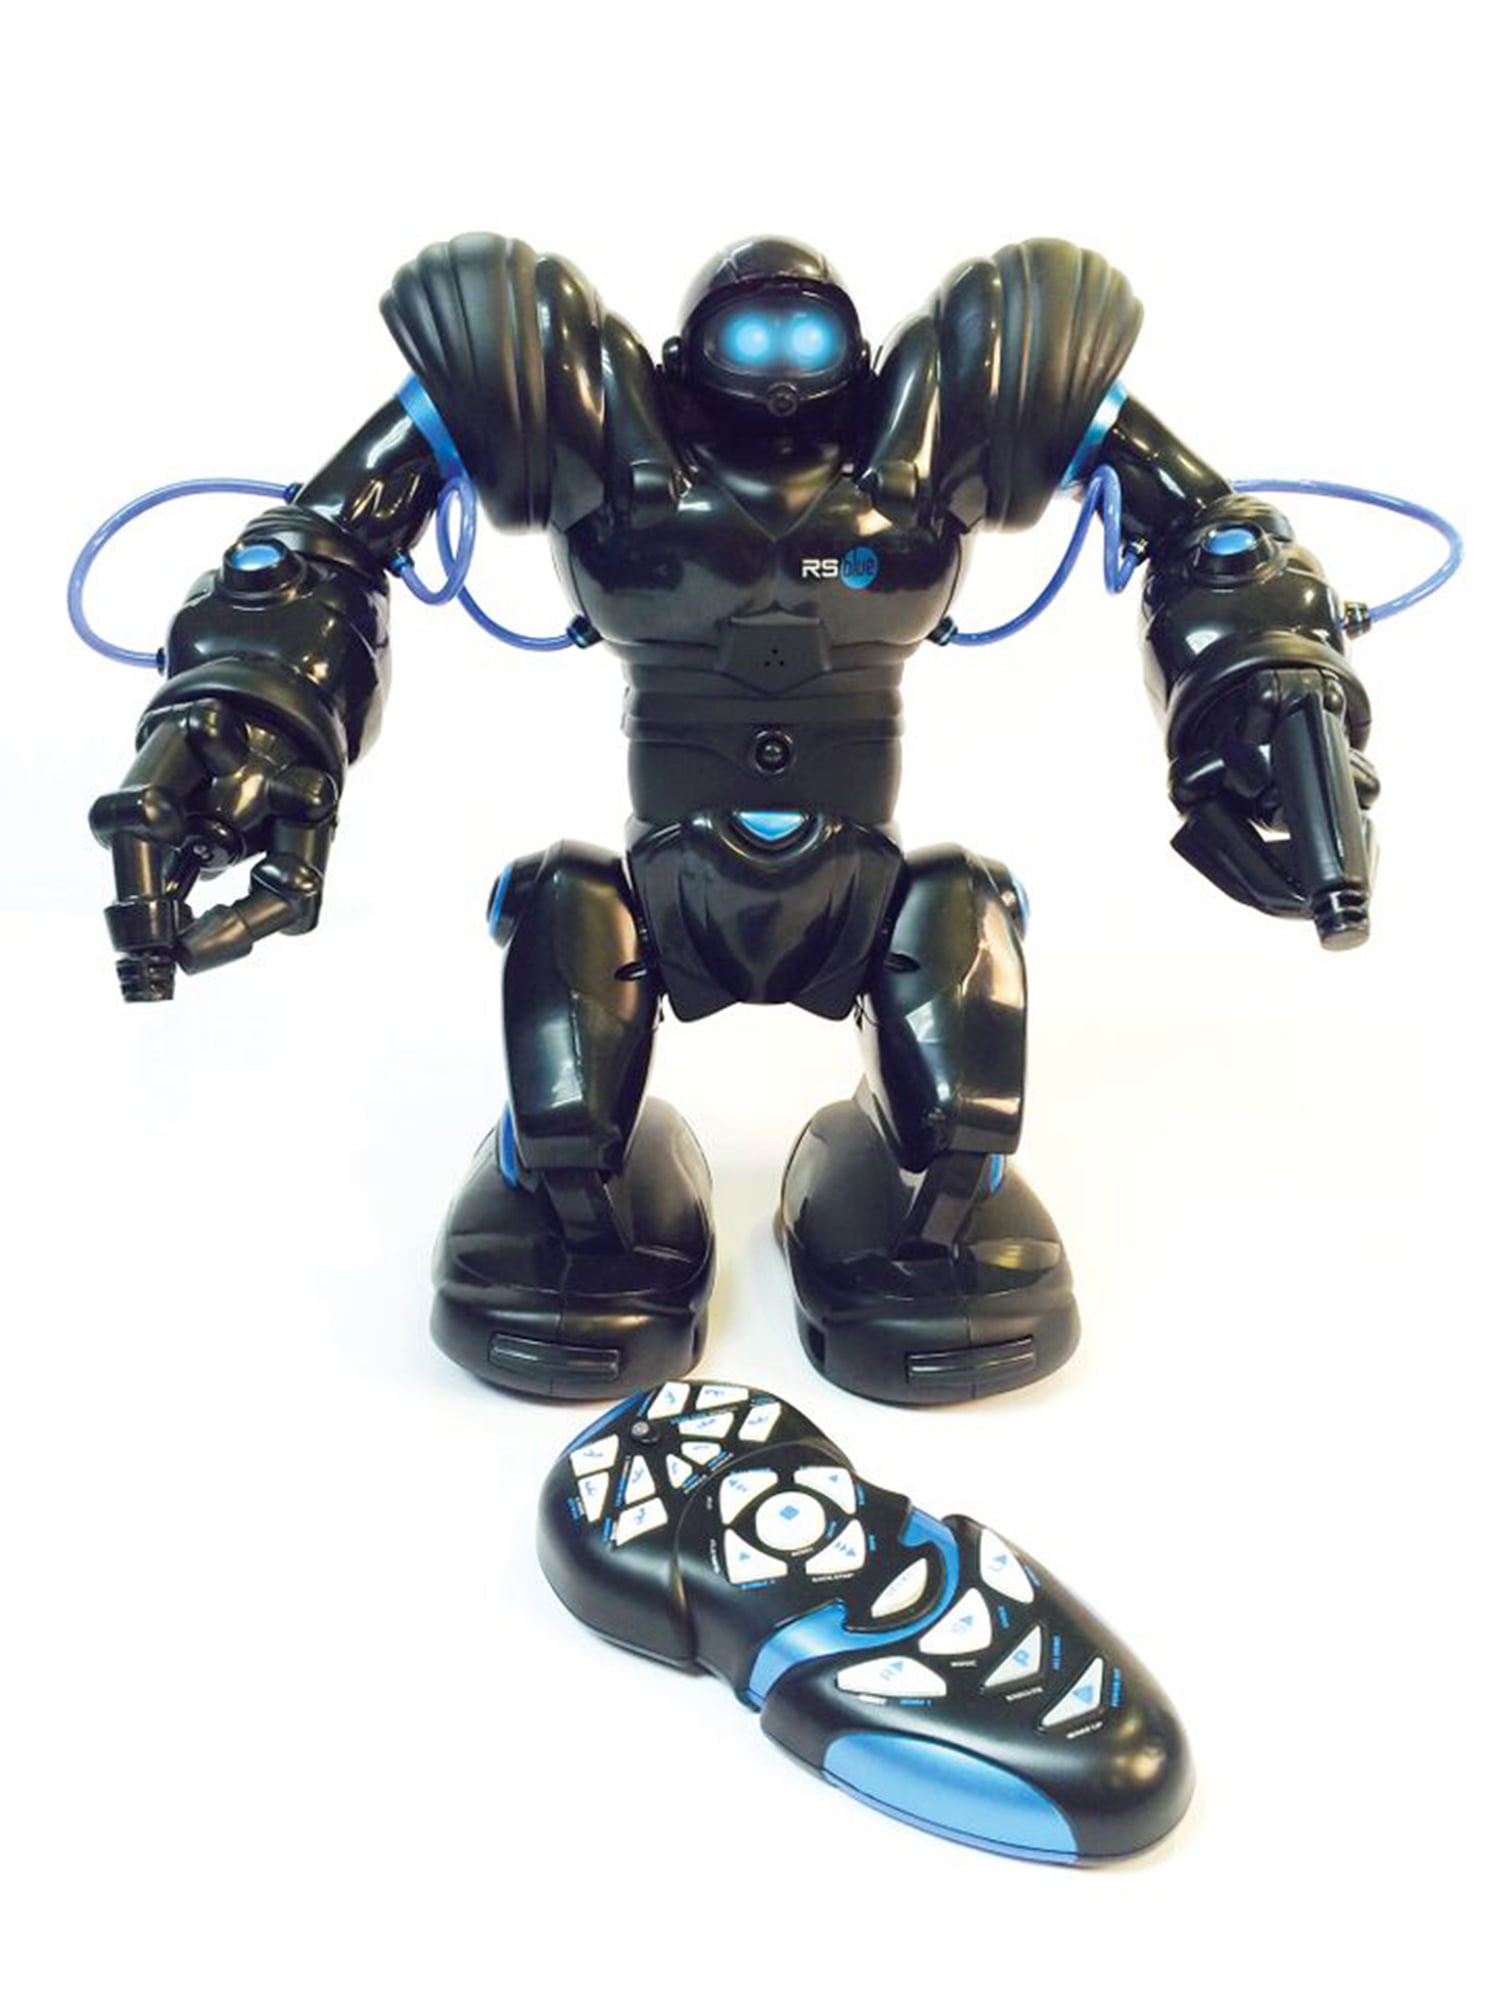 Robosapien Robot Wowwee Remote Control Toy Blue Wow Wee Mini Humanoid 